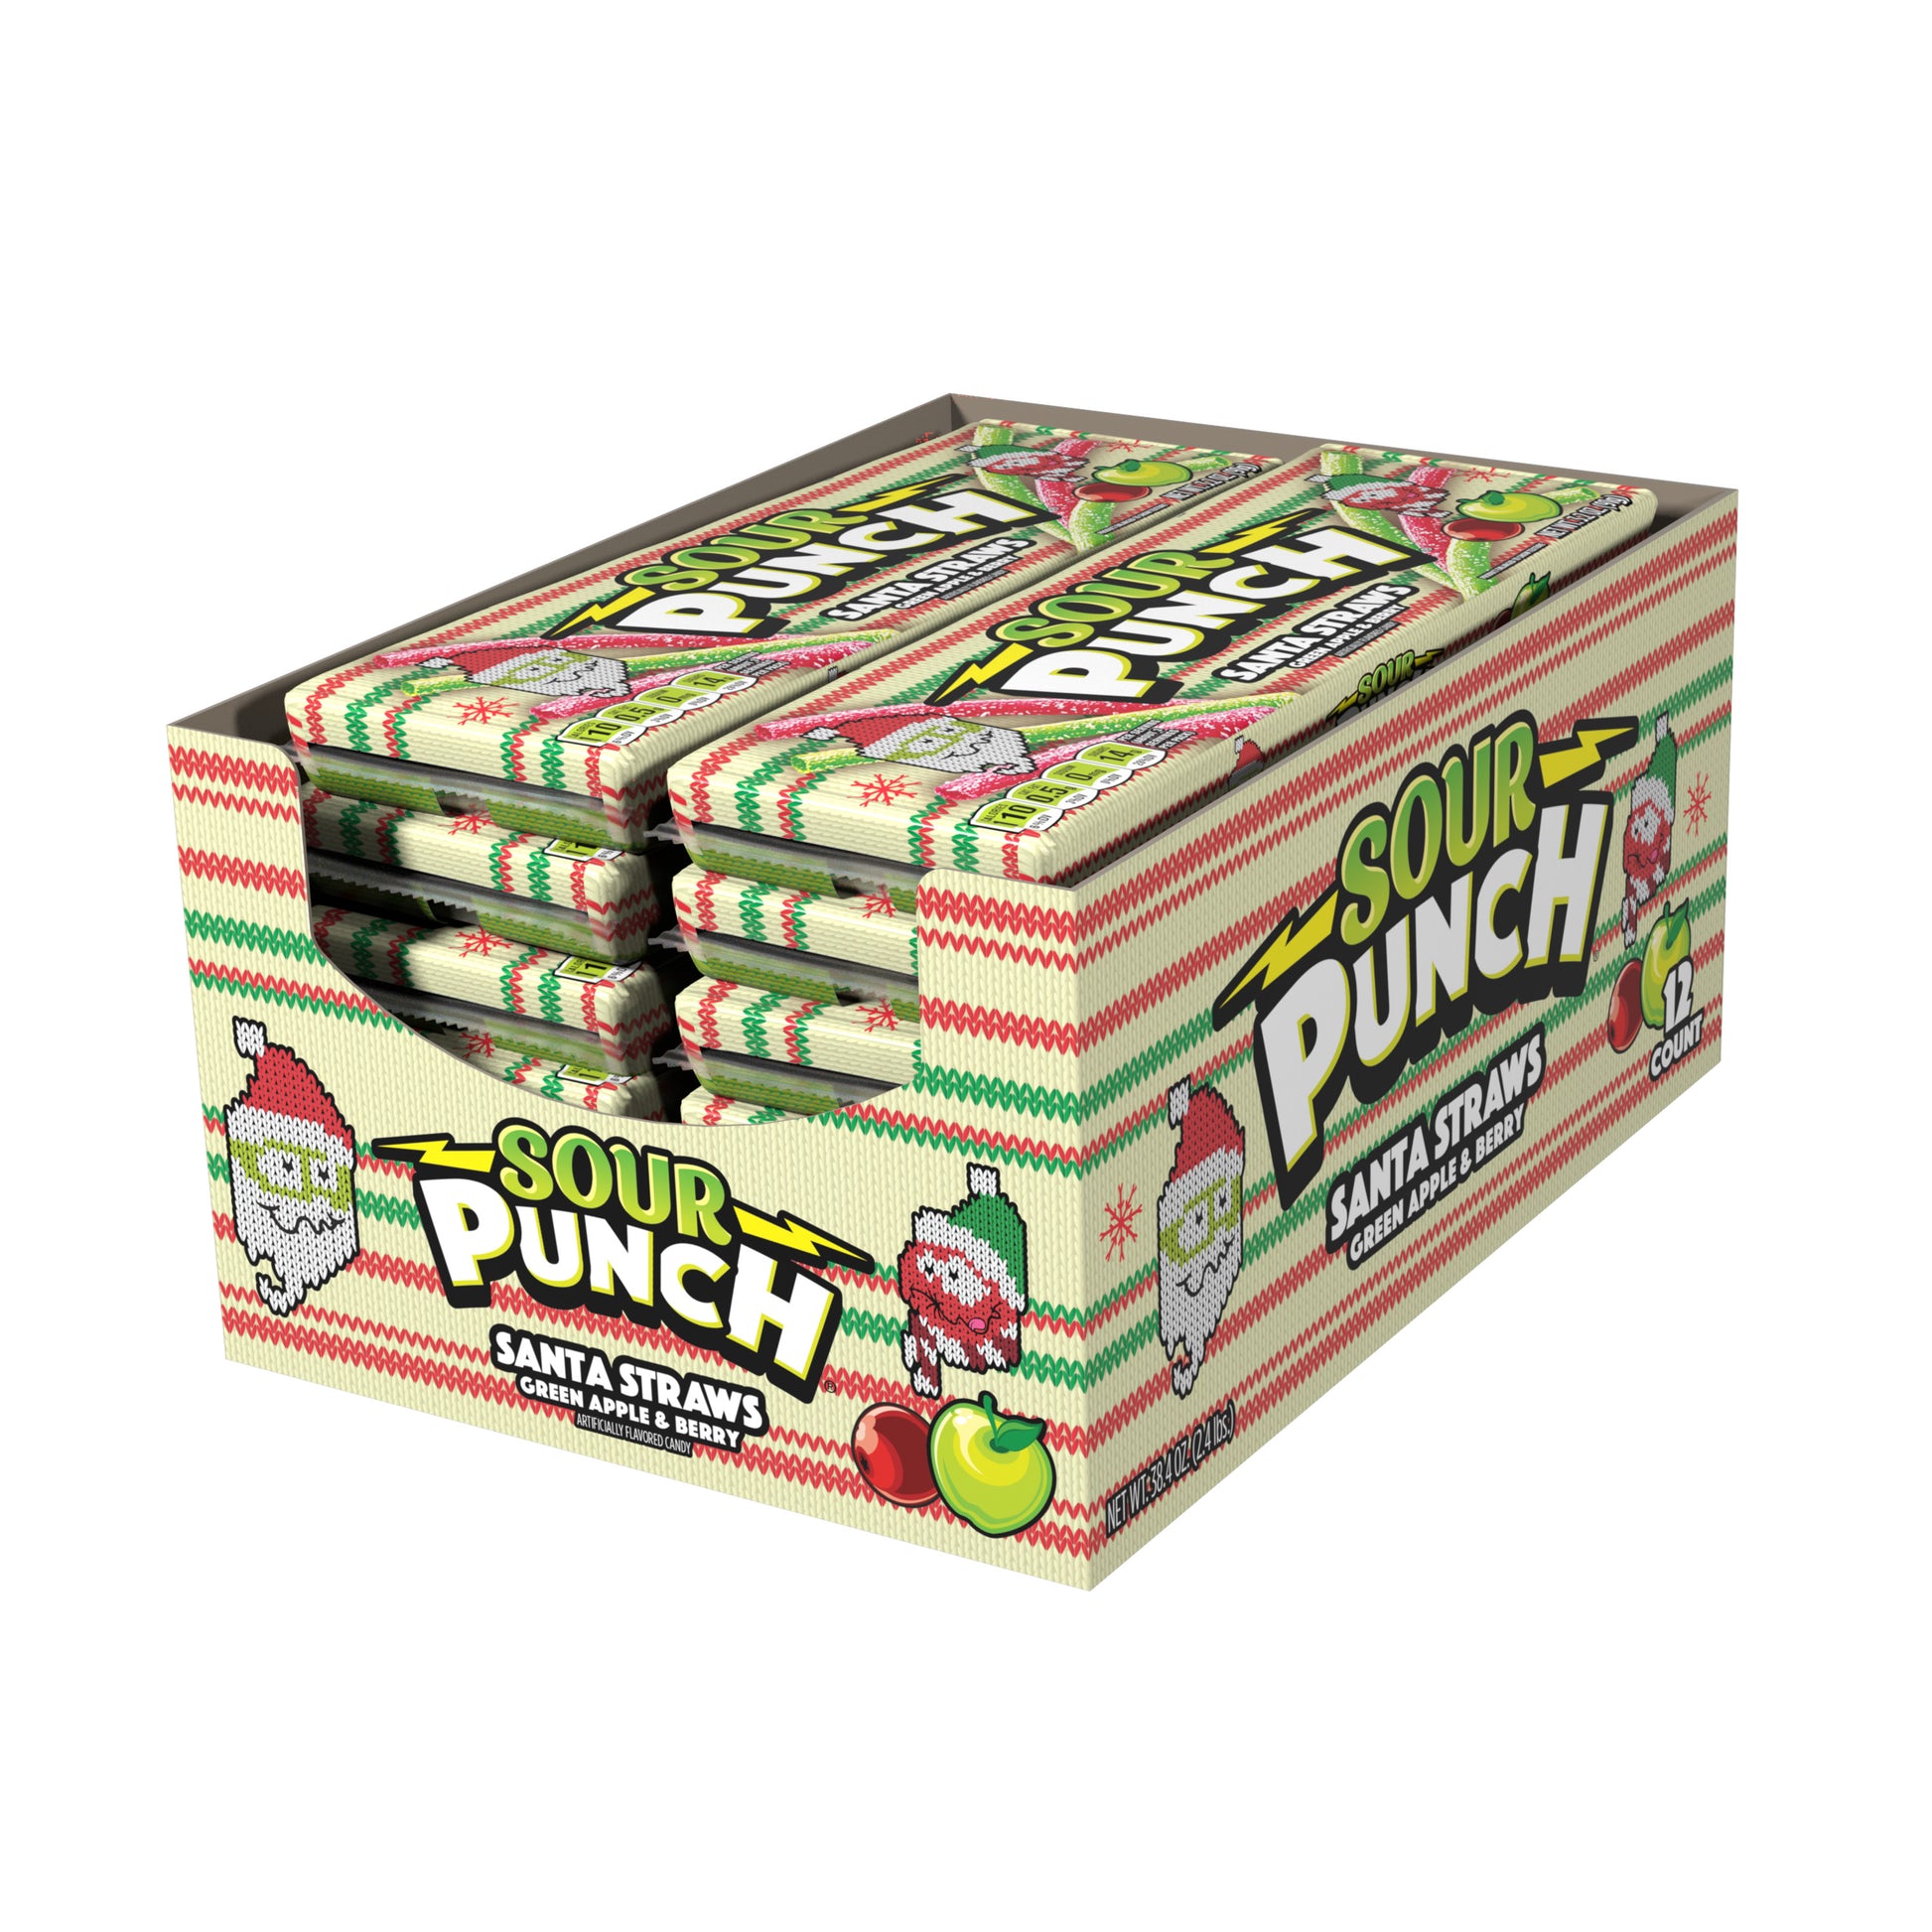 SOUR PUNCH Santa Straws Holiday Candy -12 pack of festive candy trays